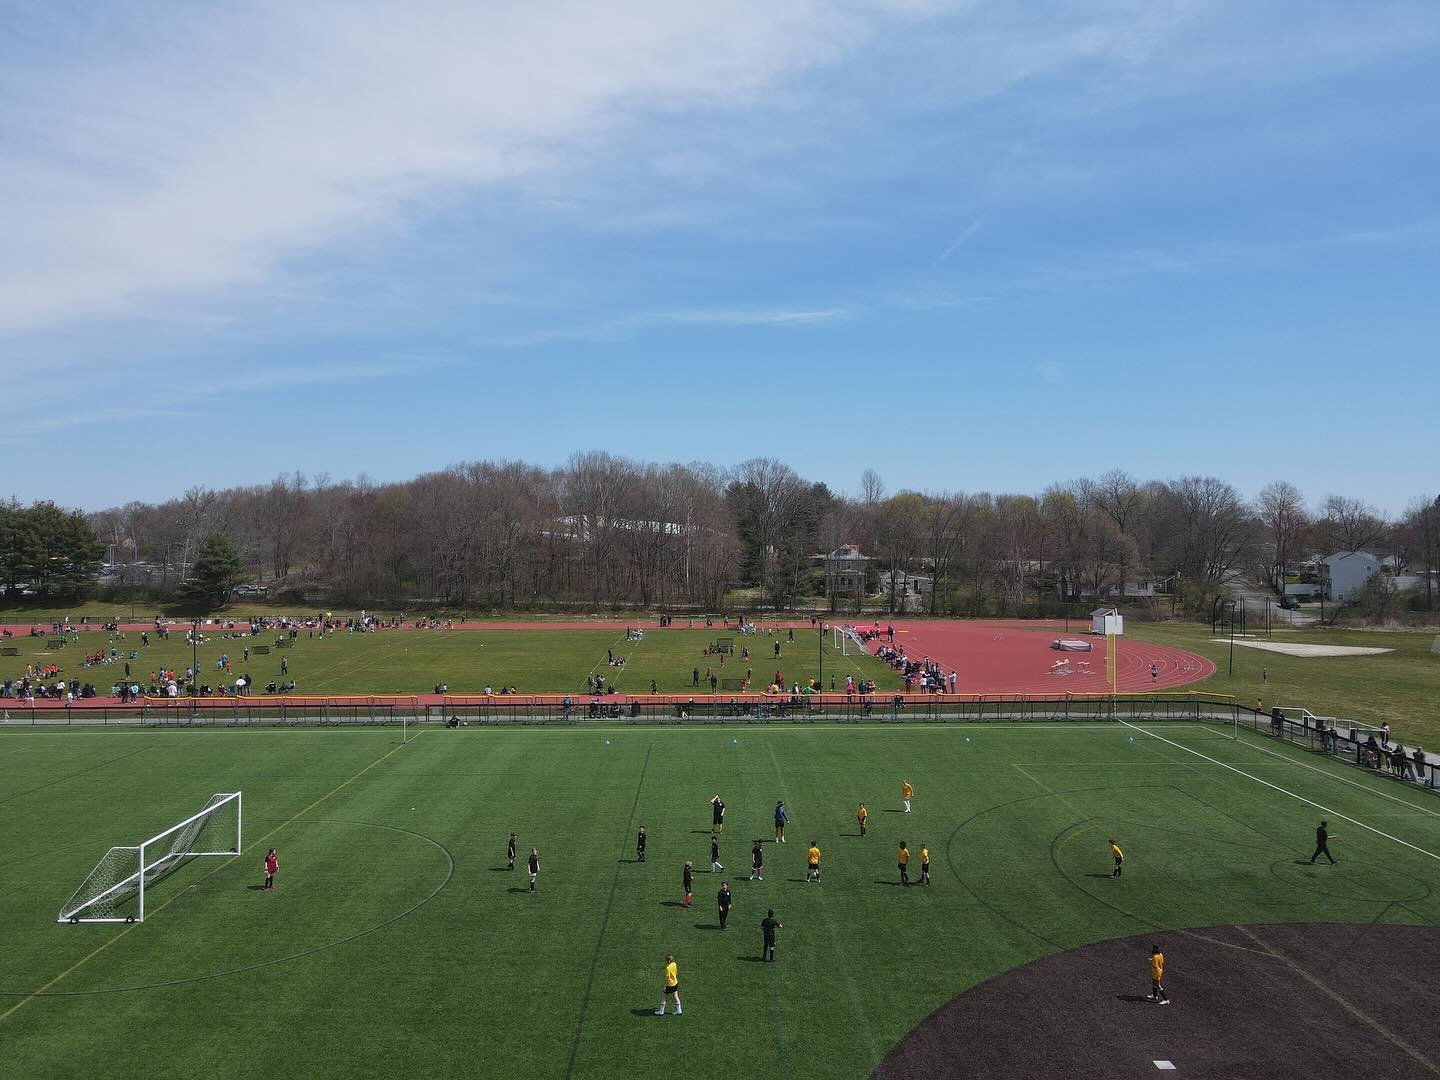 Views from High Above on a beautiful day for soccer!! Lots of smiling faces!!